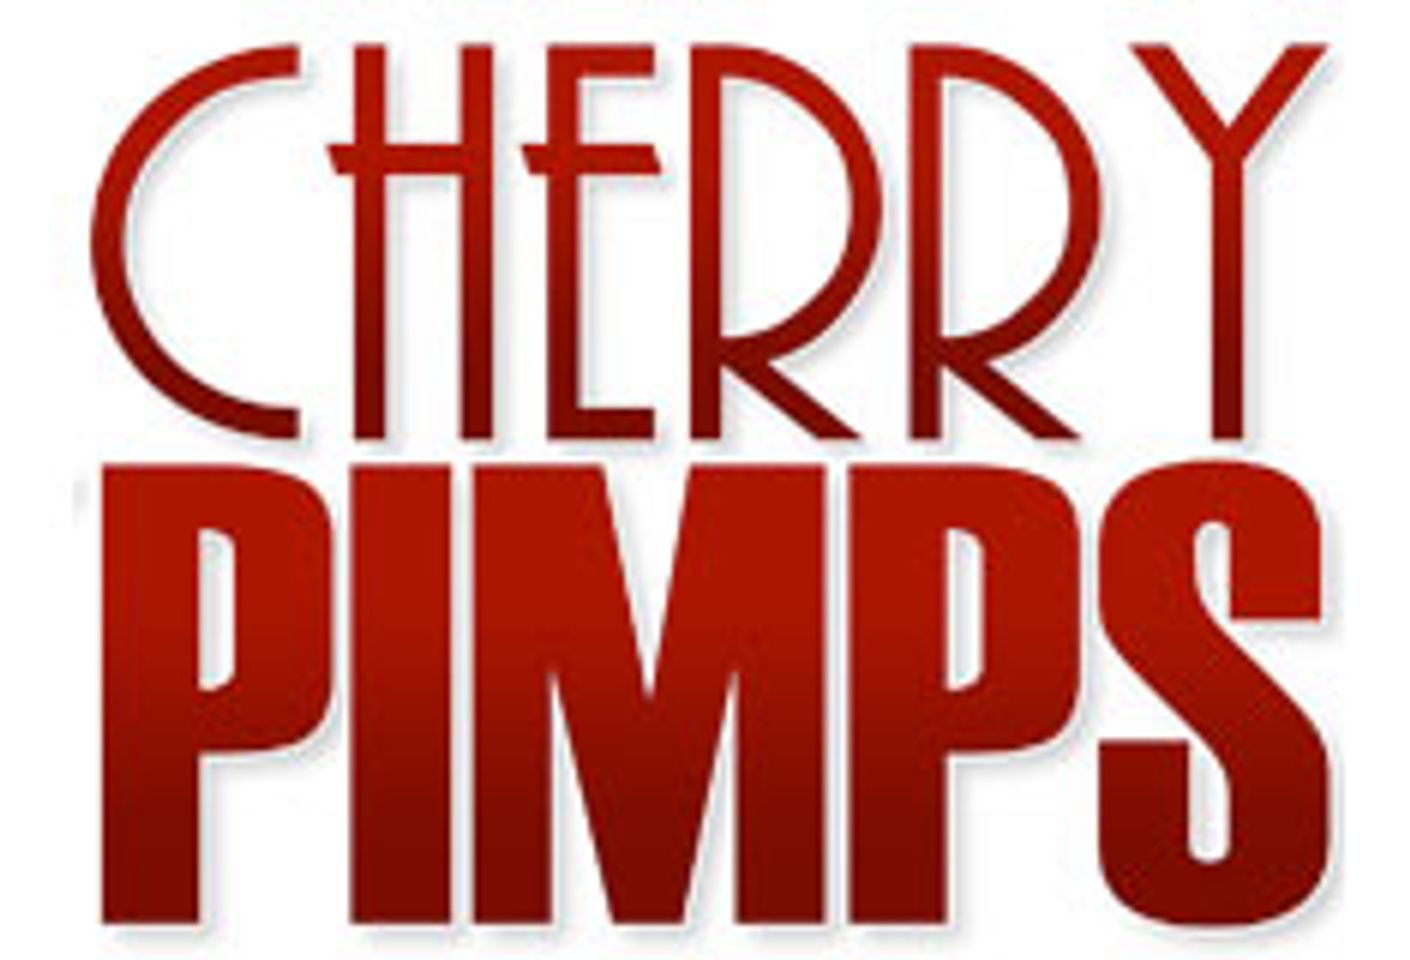 Holiday Season Heating Up Thanks to Streamate and Cherry Pimps